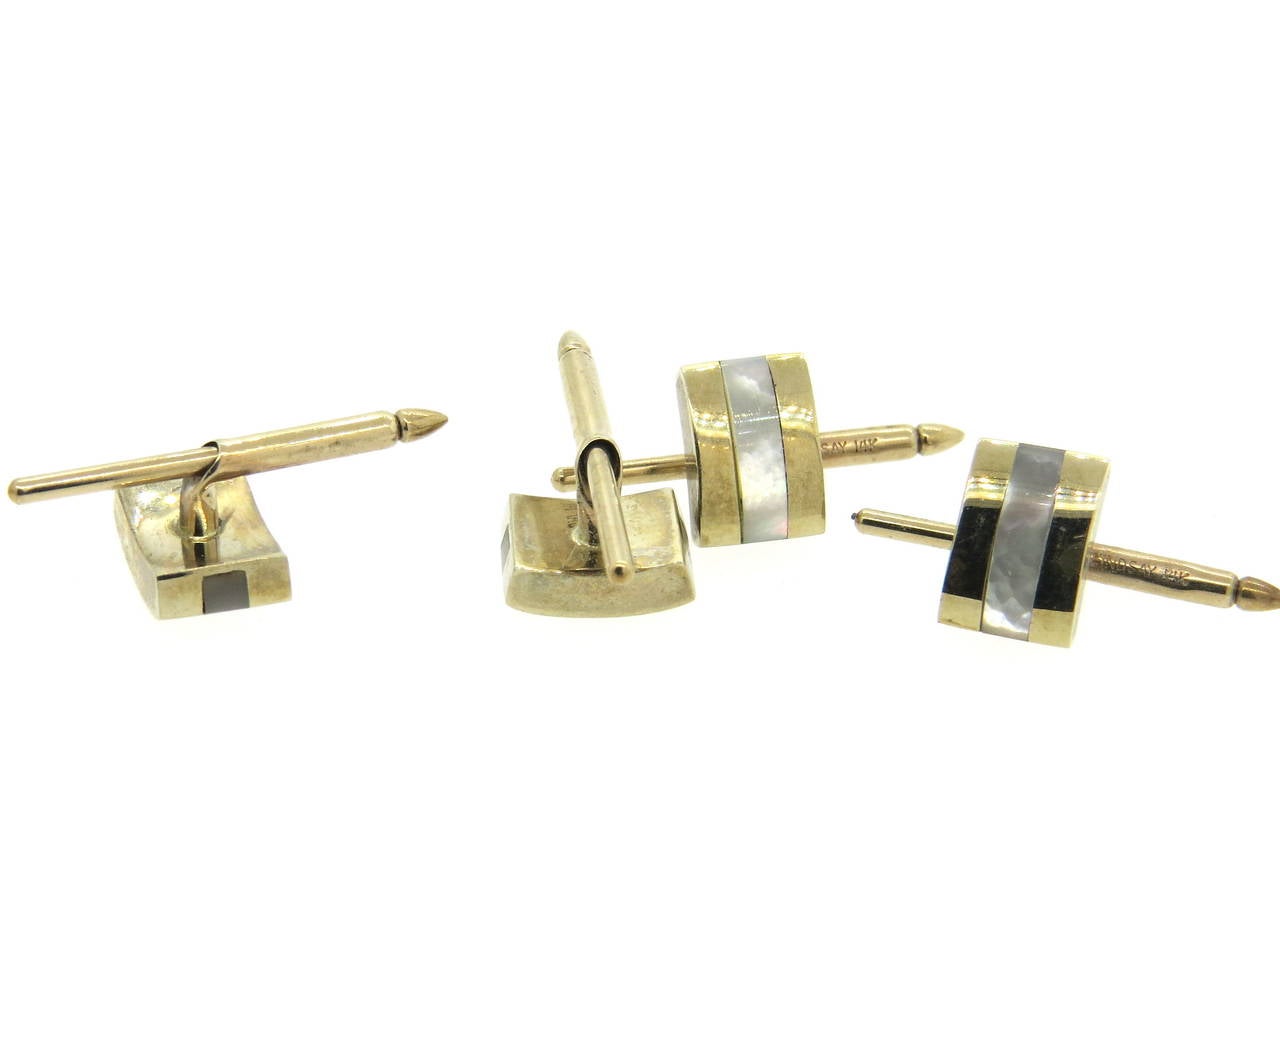 Set of four 14k gold dress studs, crafted by Lindsay & Co, set with mother of pearl inlay. each stud top measures 11.2mm x 8mm.  Marked Lindsay and 14k. Weight of the set - 14 grams